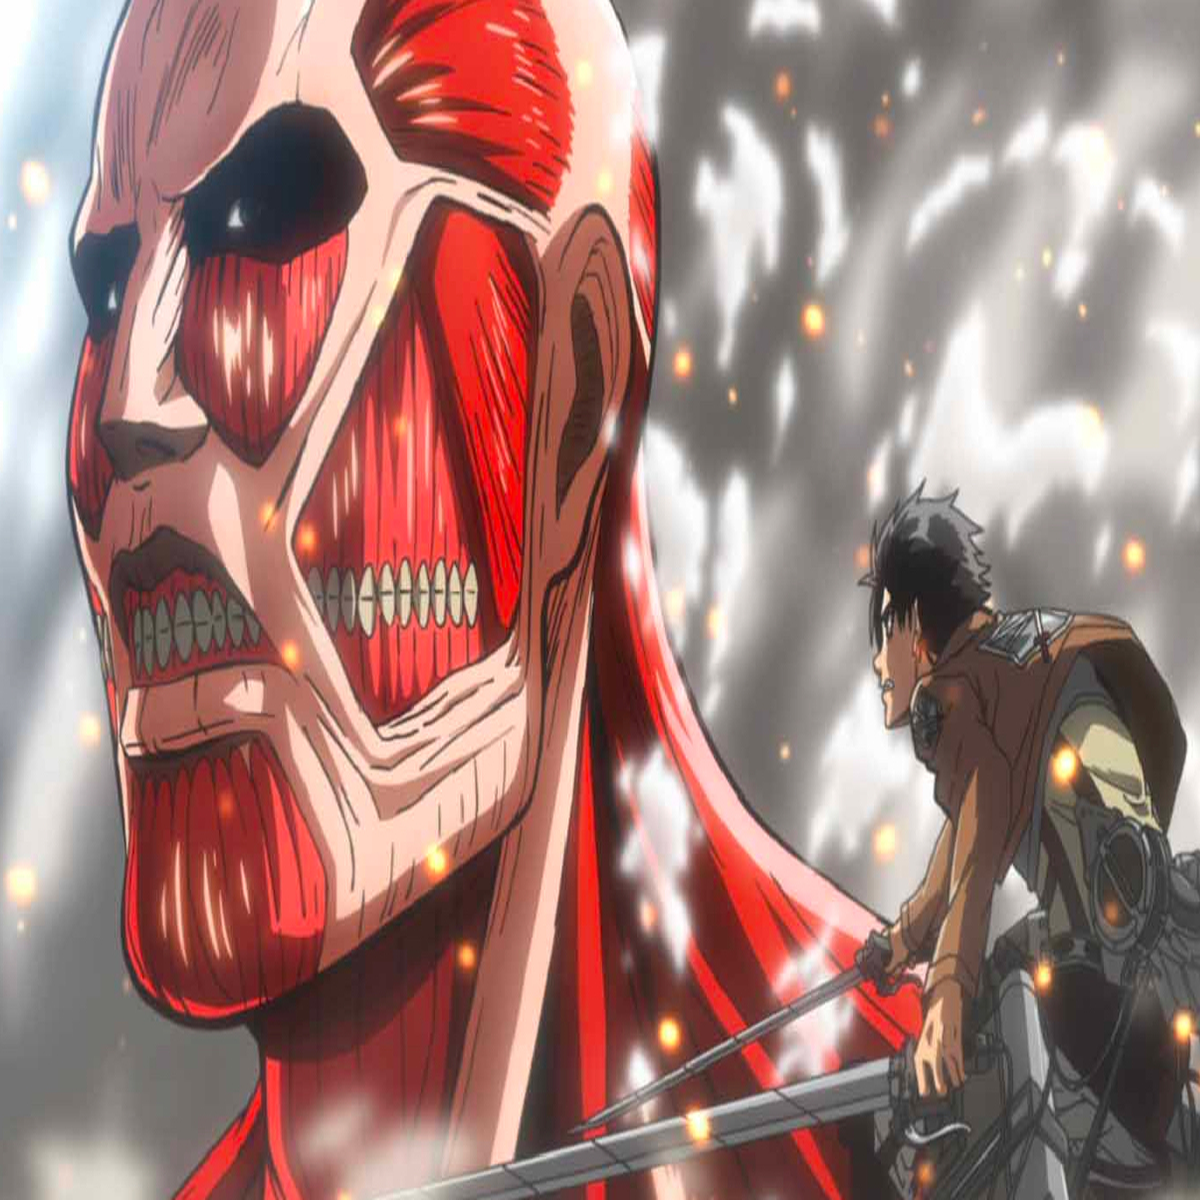 Crunchyroll - The Second Season of Attack on Titan just launched